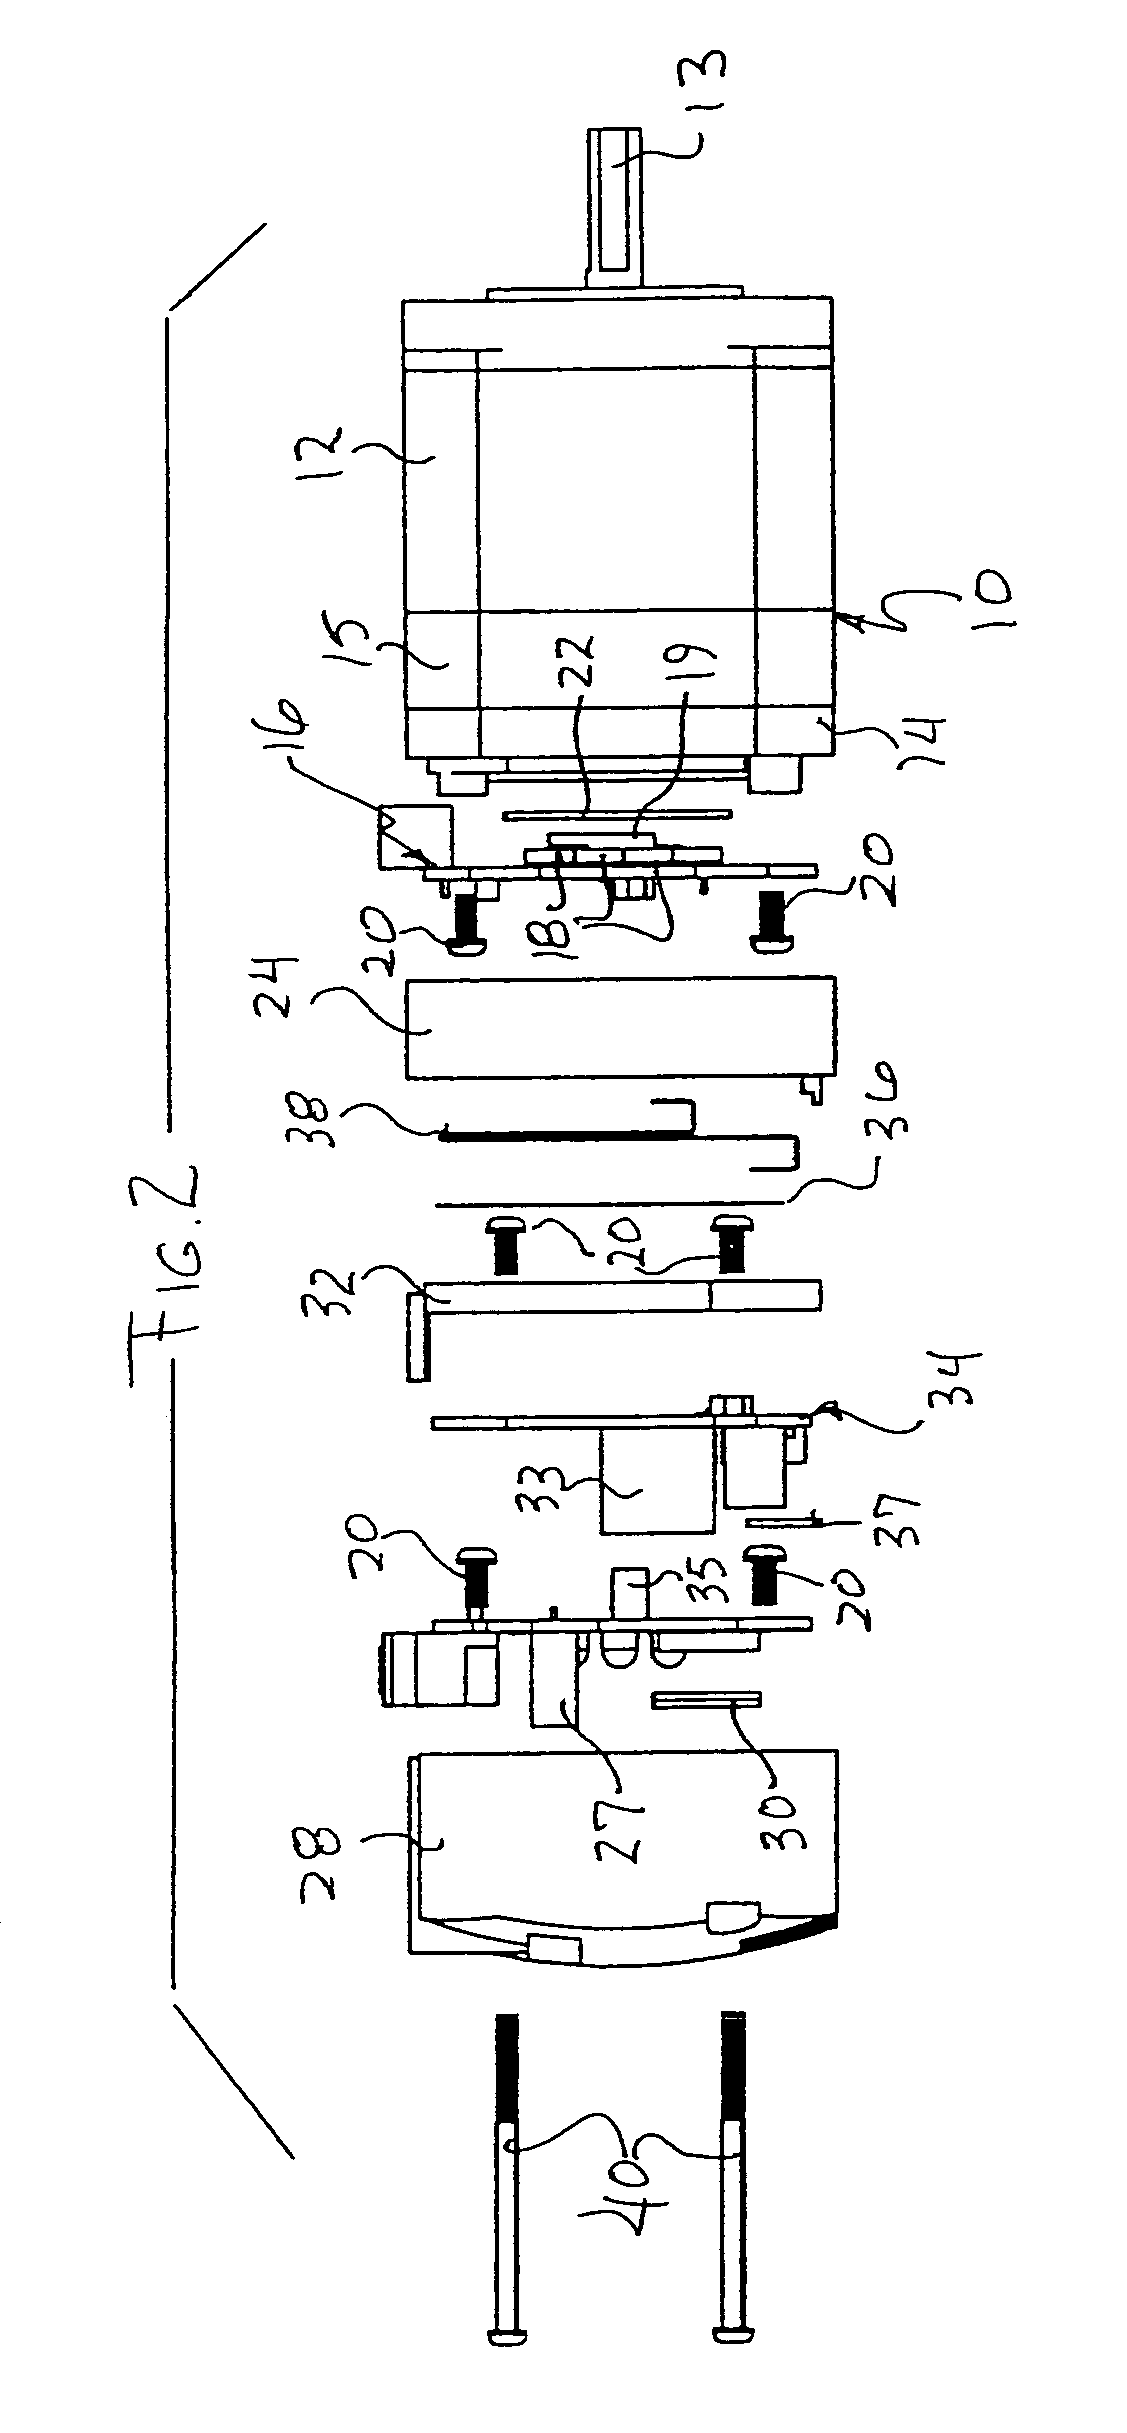 Integrated electric motor and drive, optimized for high-temperature operation